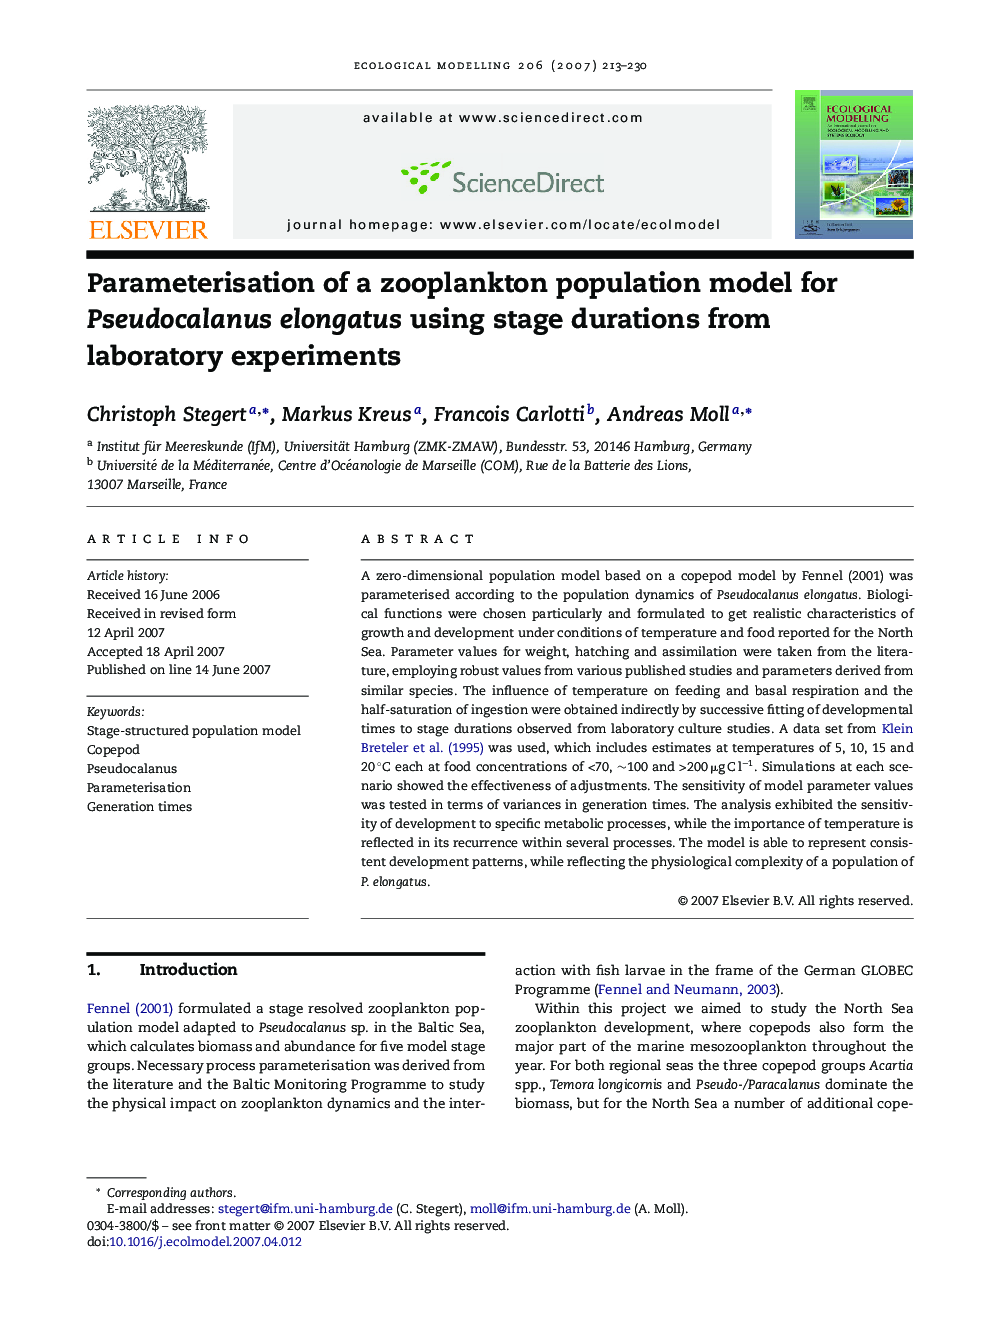 Parameterisation of a zooplankton population model for Pseudocalanus elongatus using stage durations from laboratory experiments